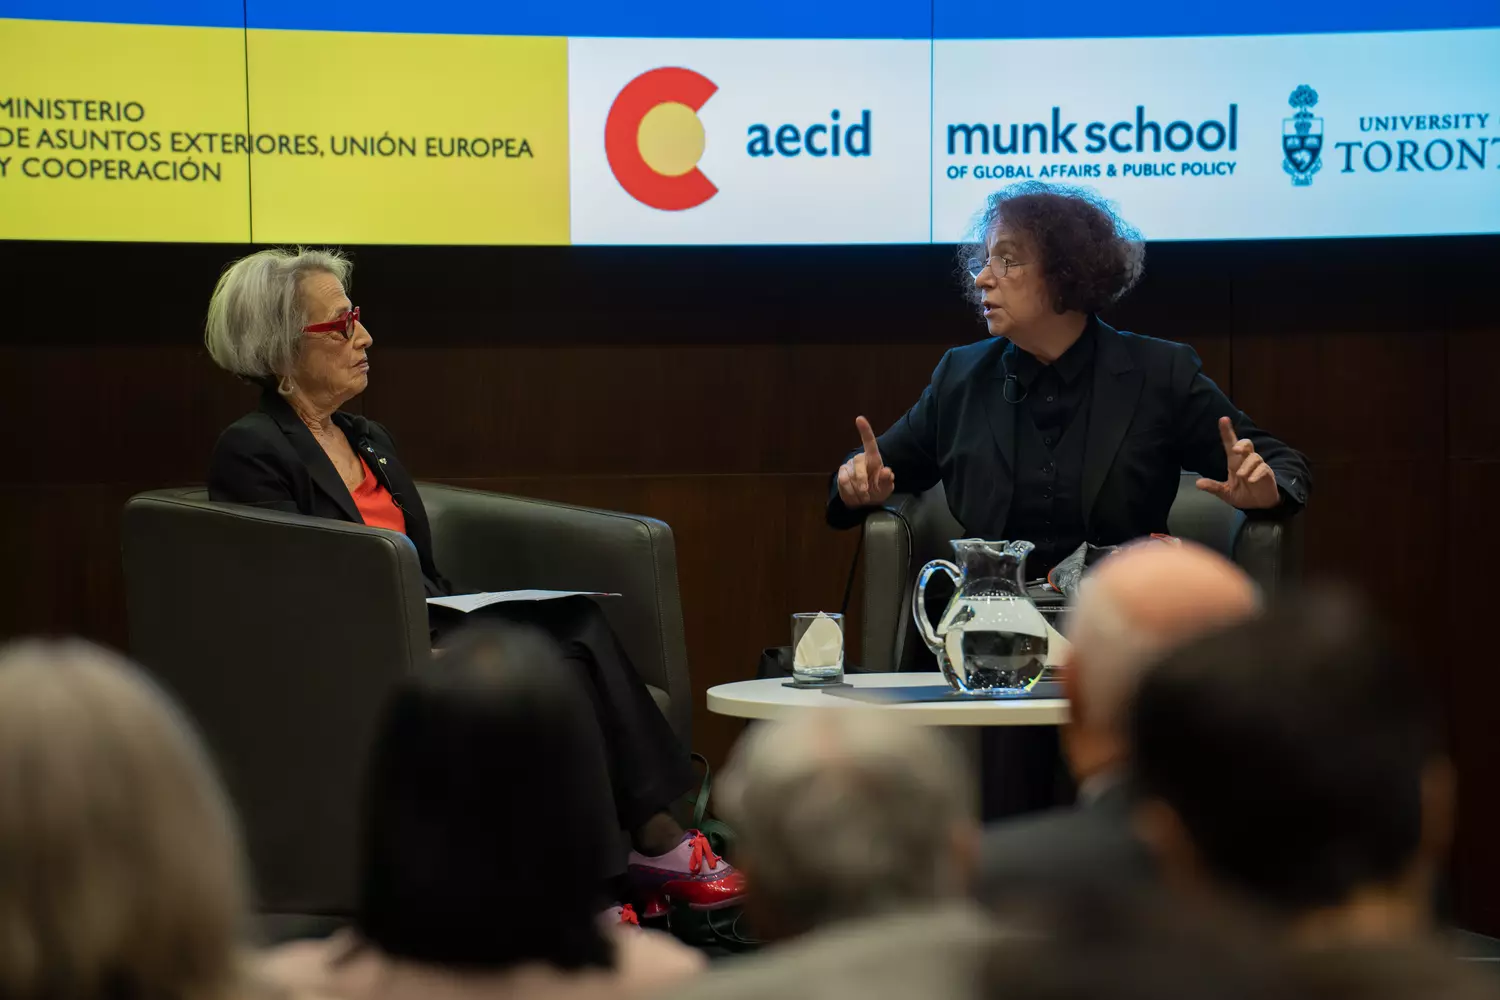 Former Foreign Minister Ana Palacio in conversation with Janice Stein of the Munk School